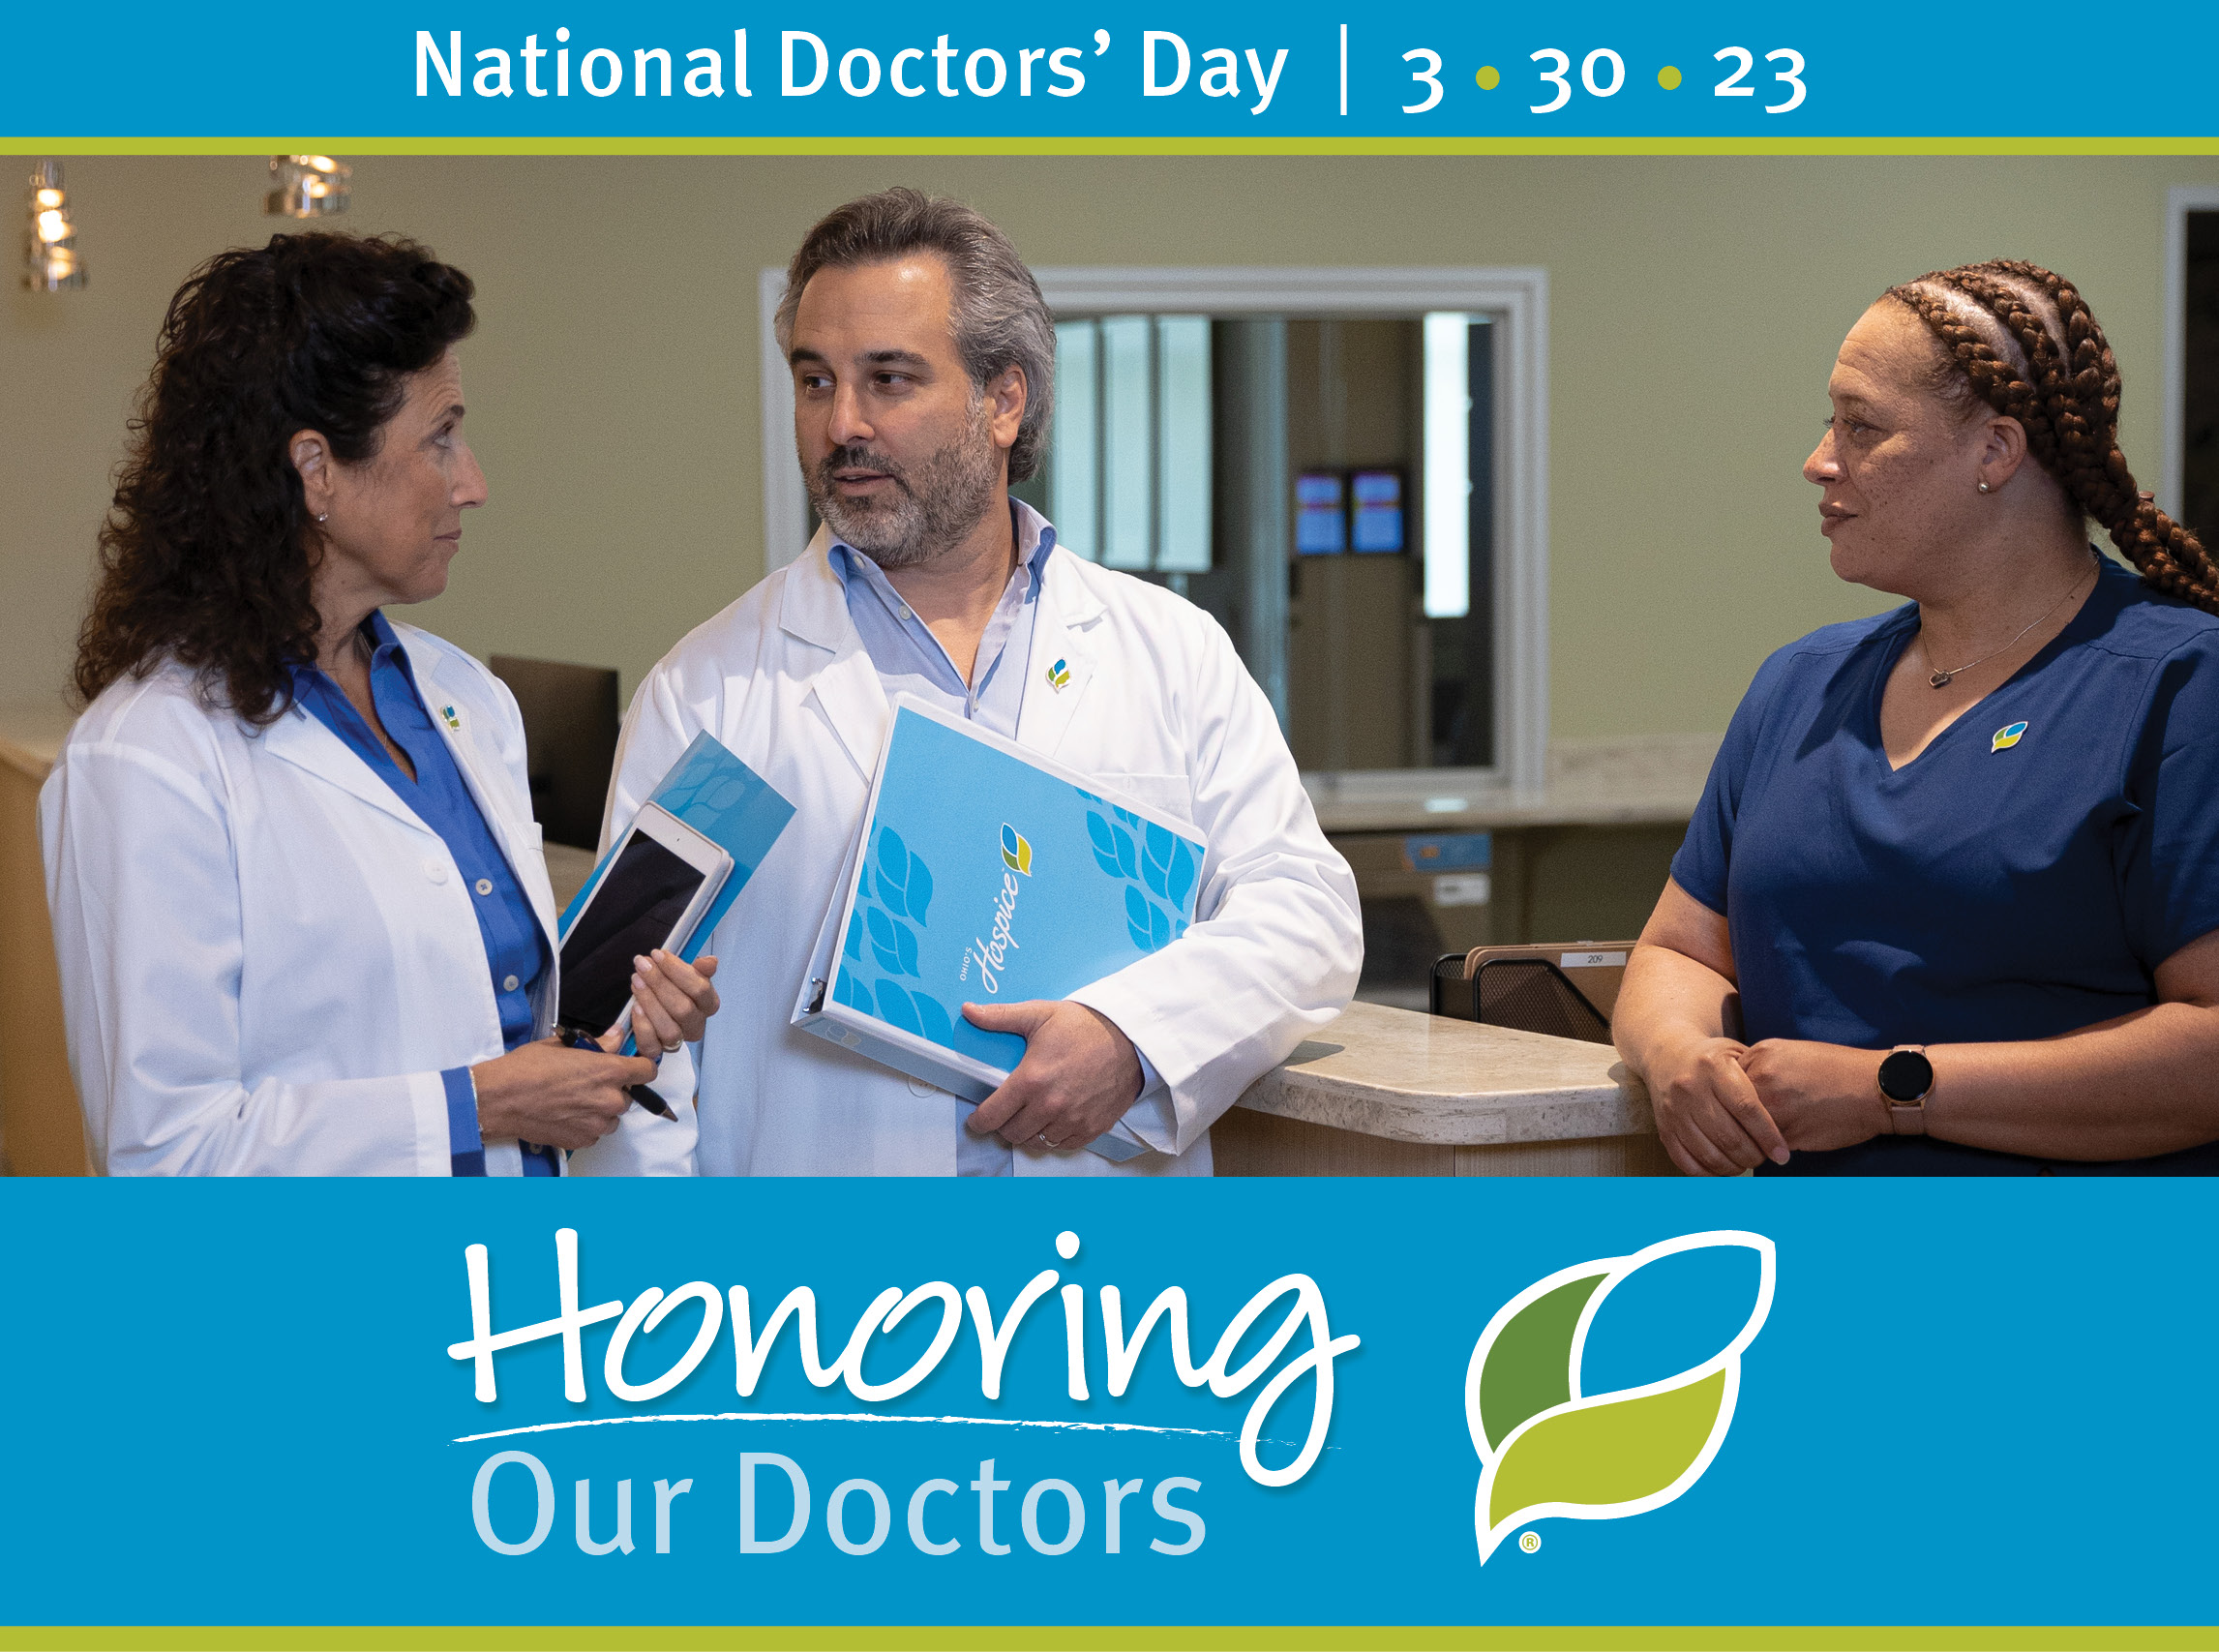 Honoring Our Doctors. National Doctors' Day. 03/30/23. Ohio's Hospice